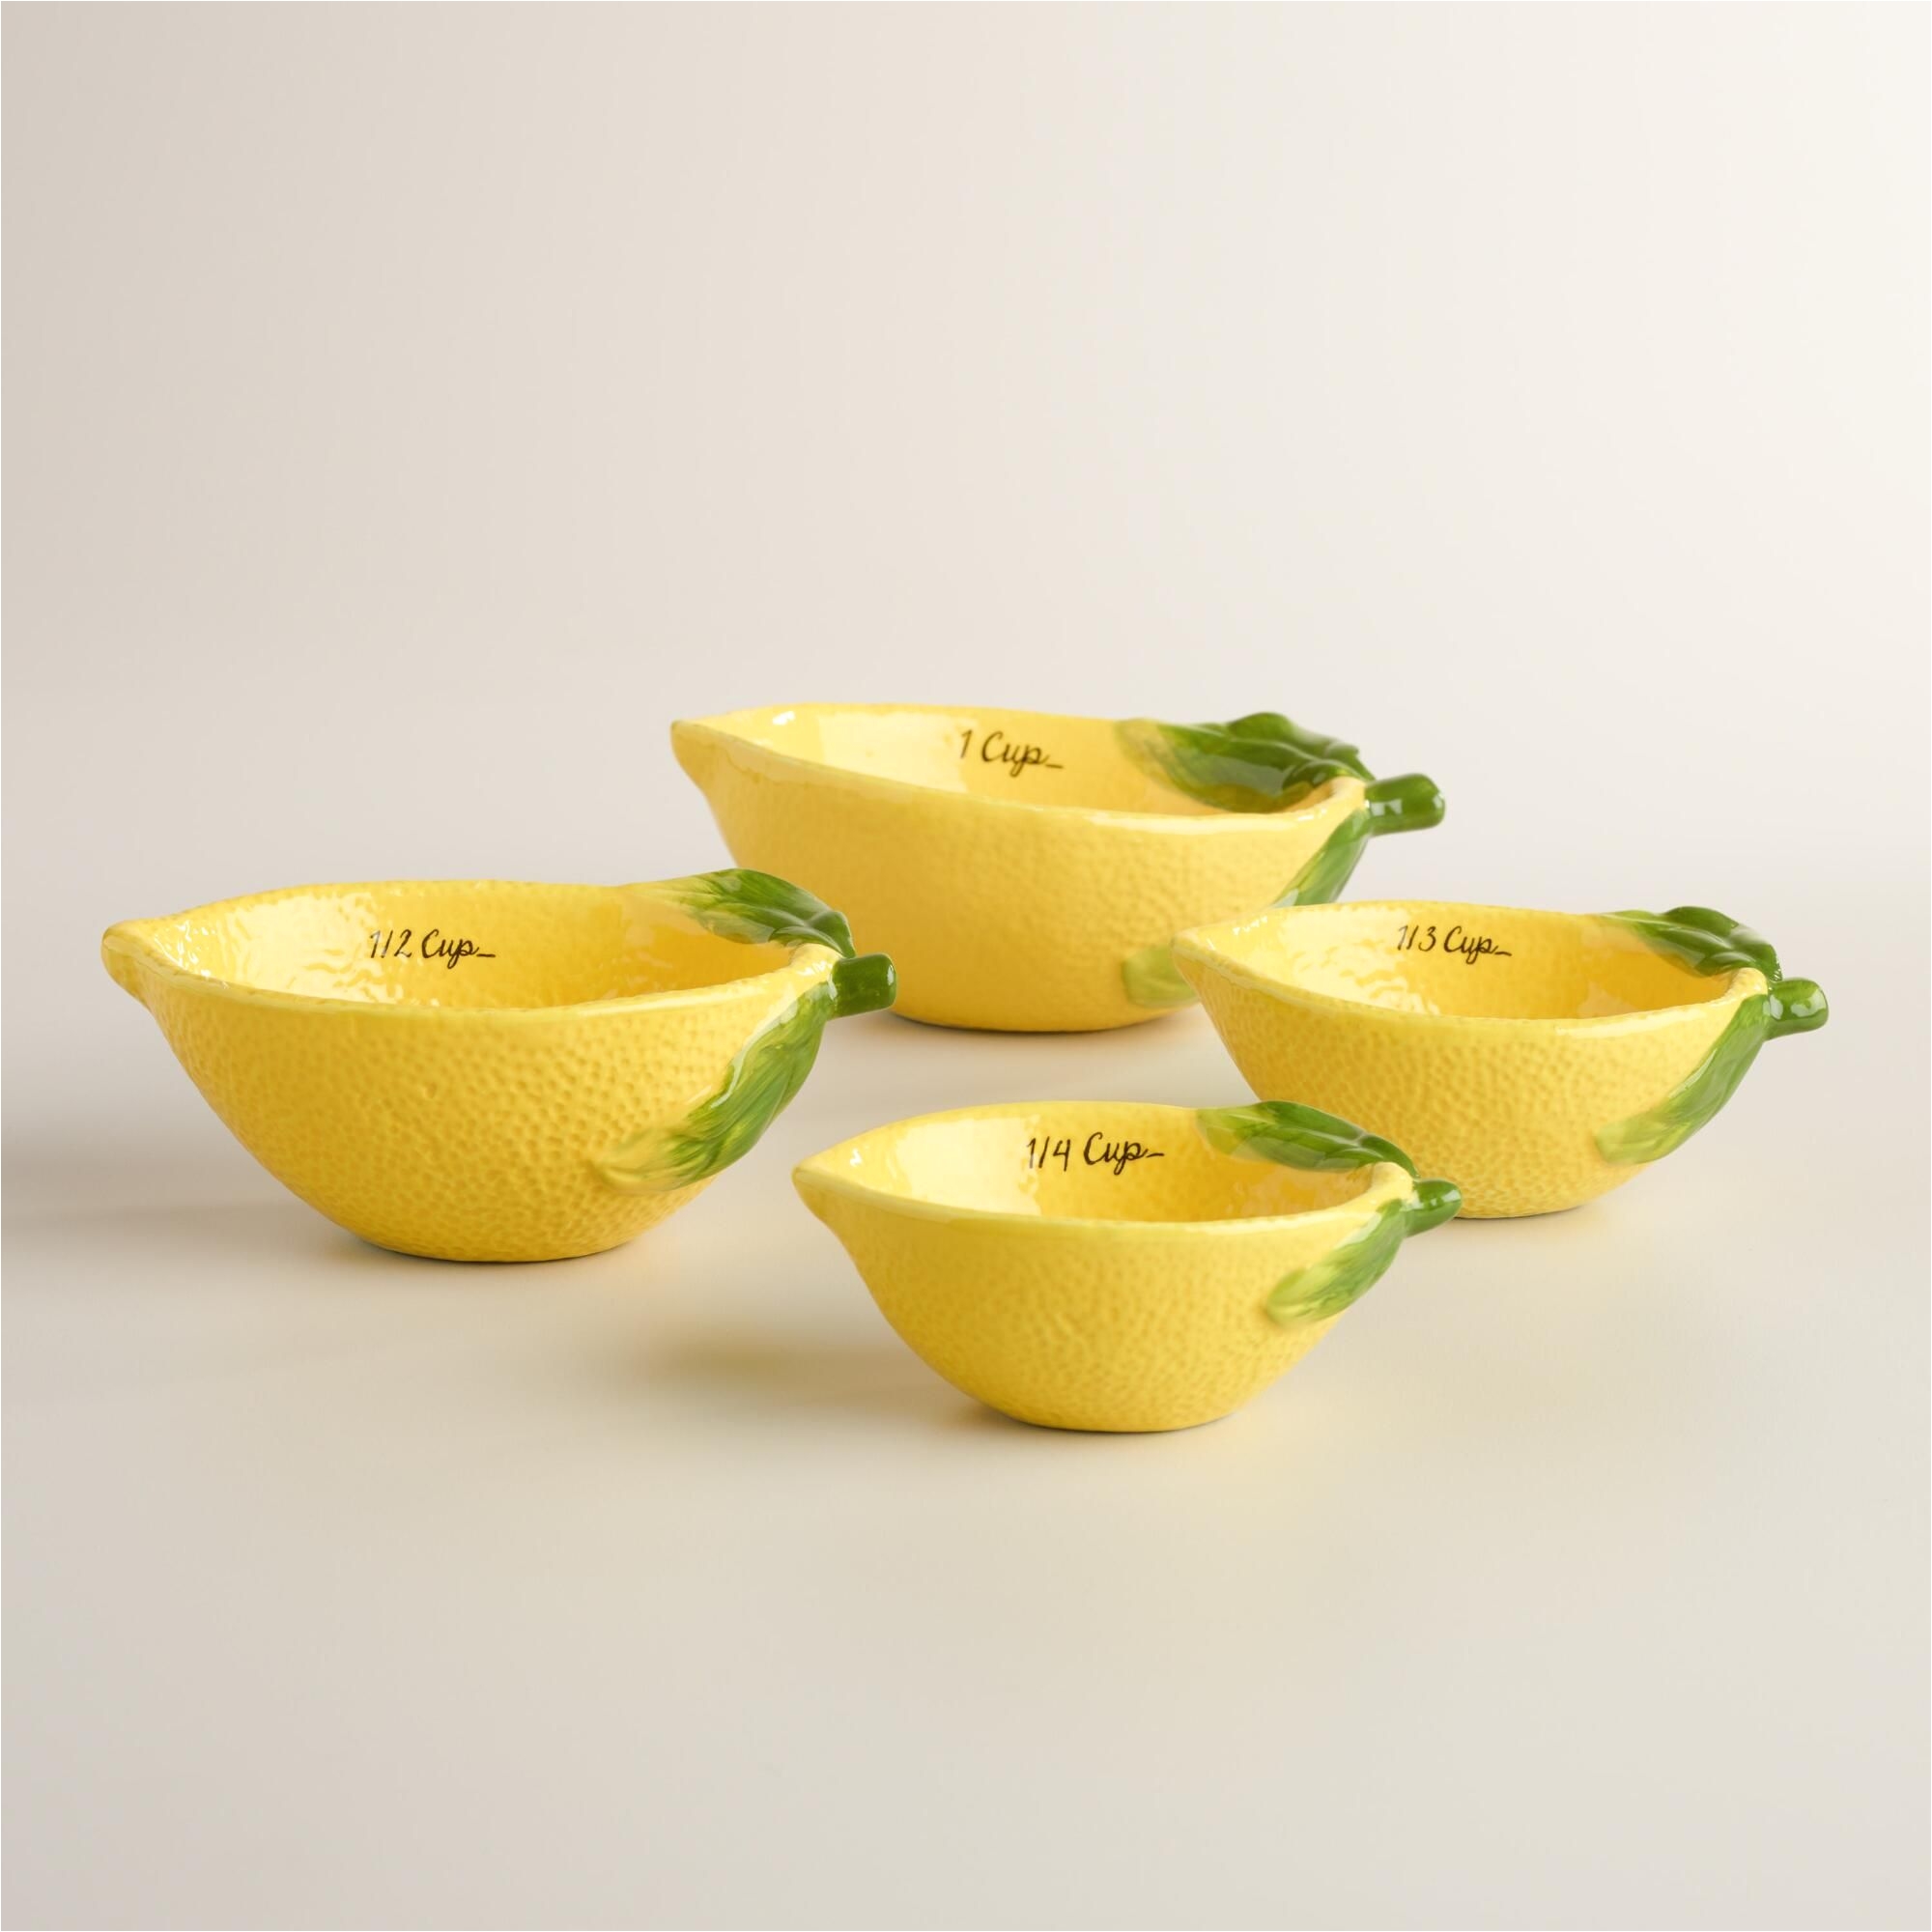 crafted of ceramic with a fruit like texture our exclusive measuring cups capture the look of fresh lemons and nest for easy storage www worldmarket